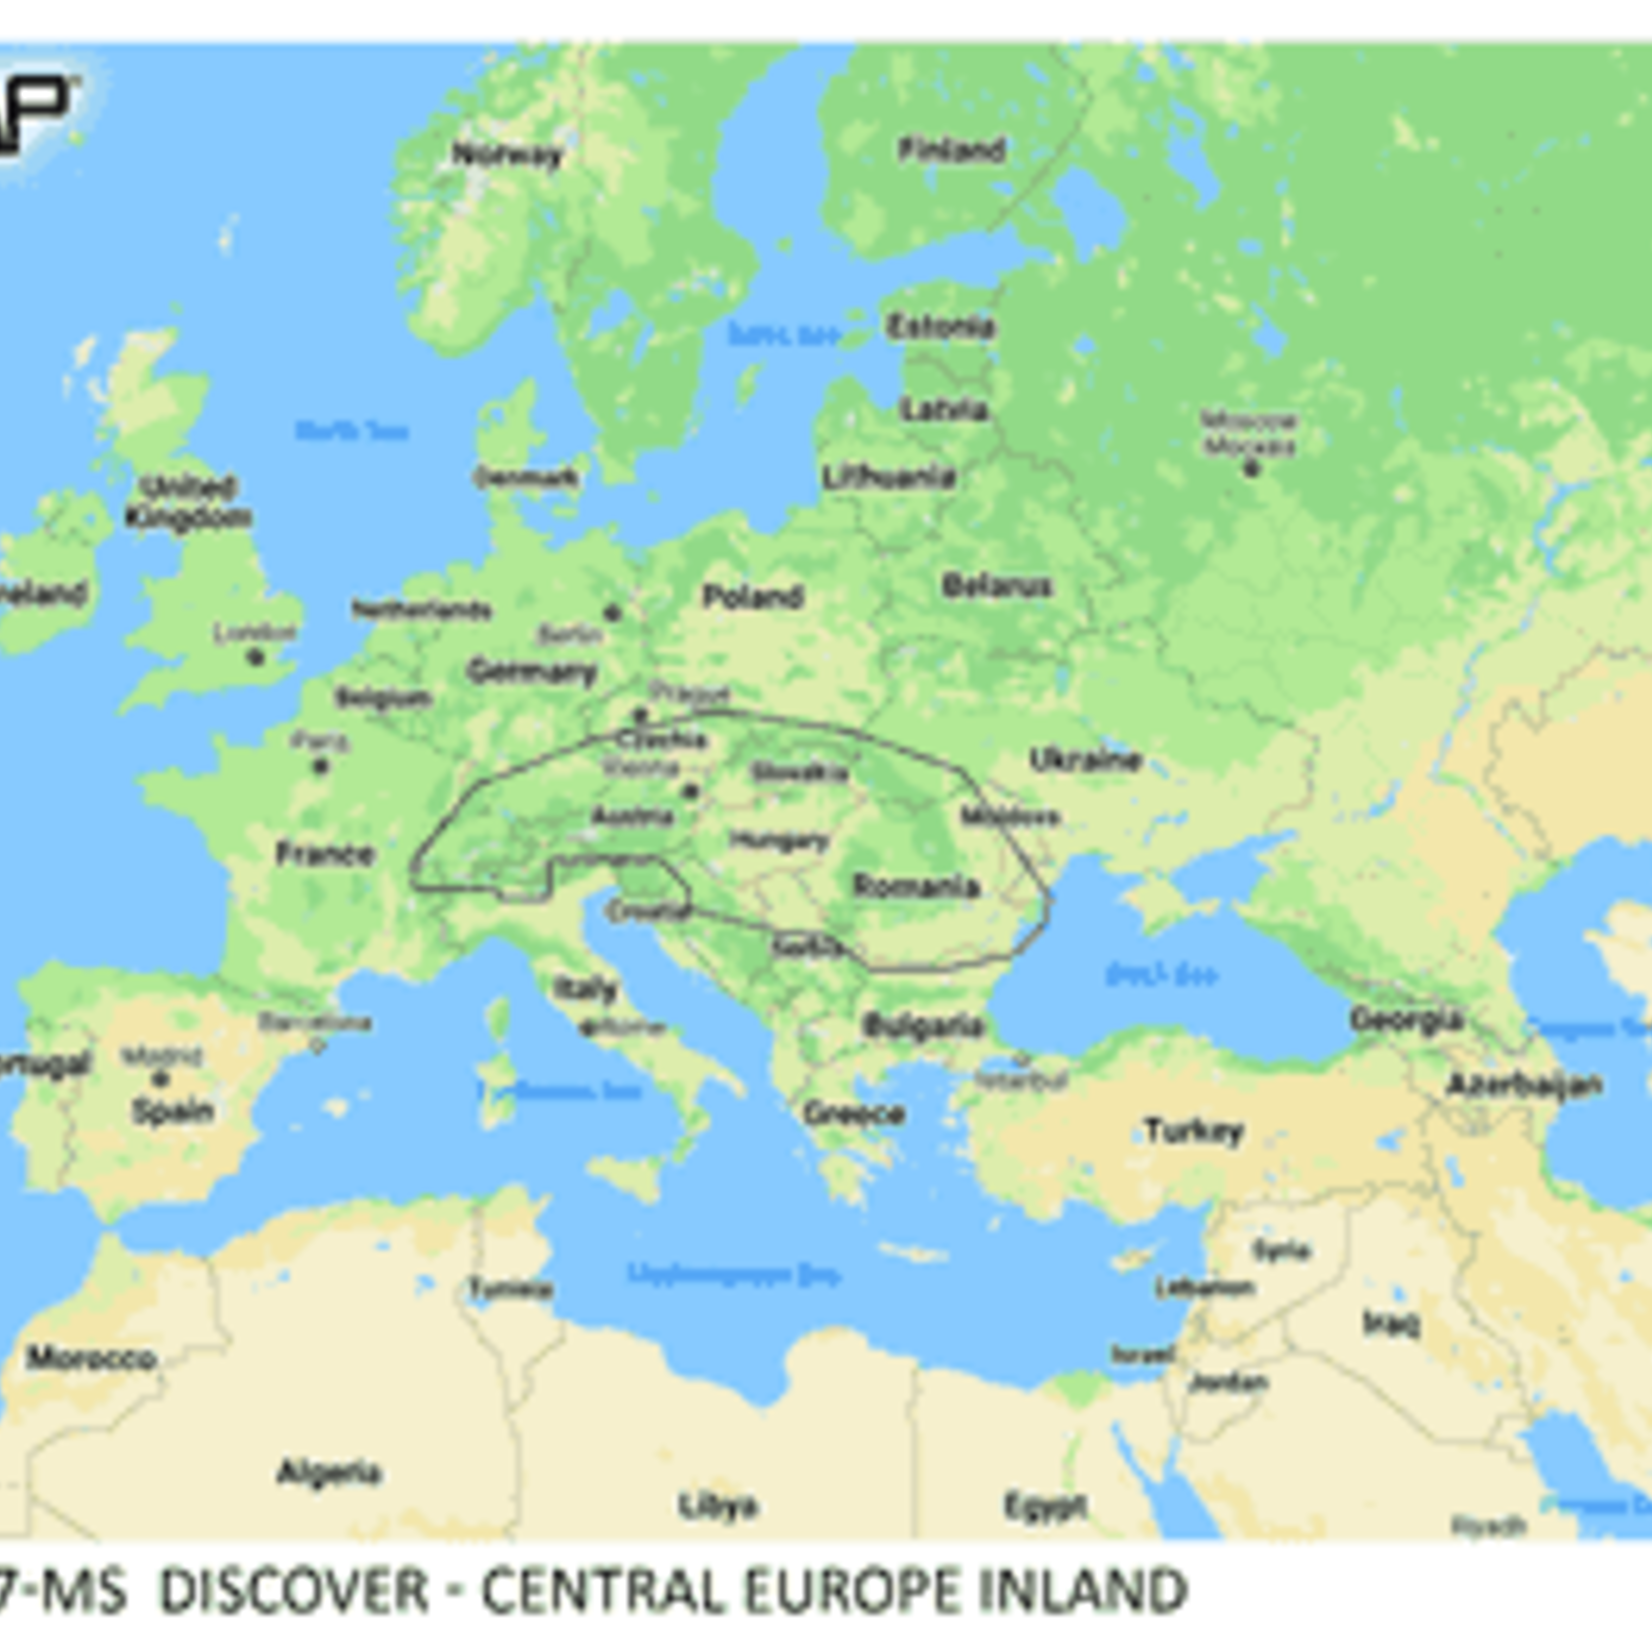 C-MAP DISCOVER - Central Europe Inland